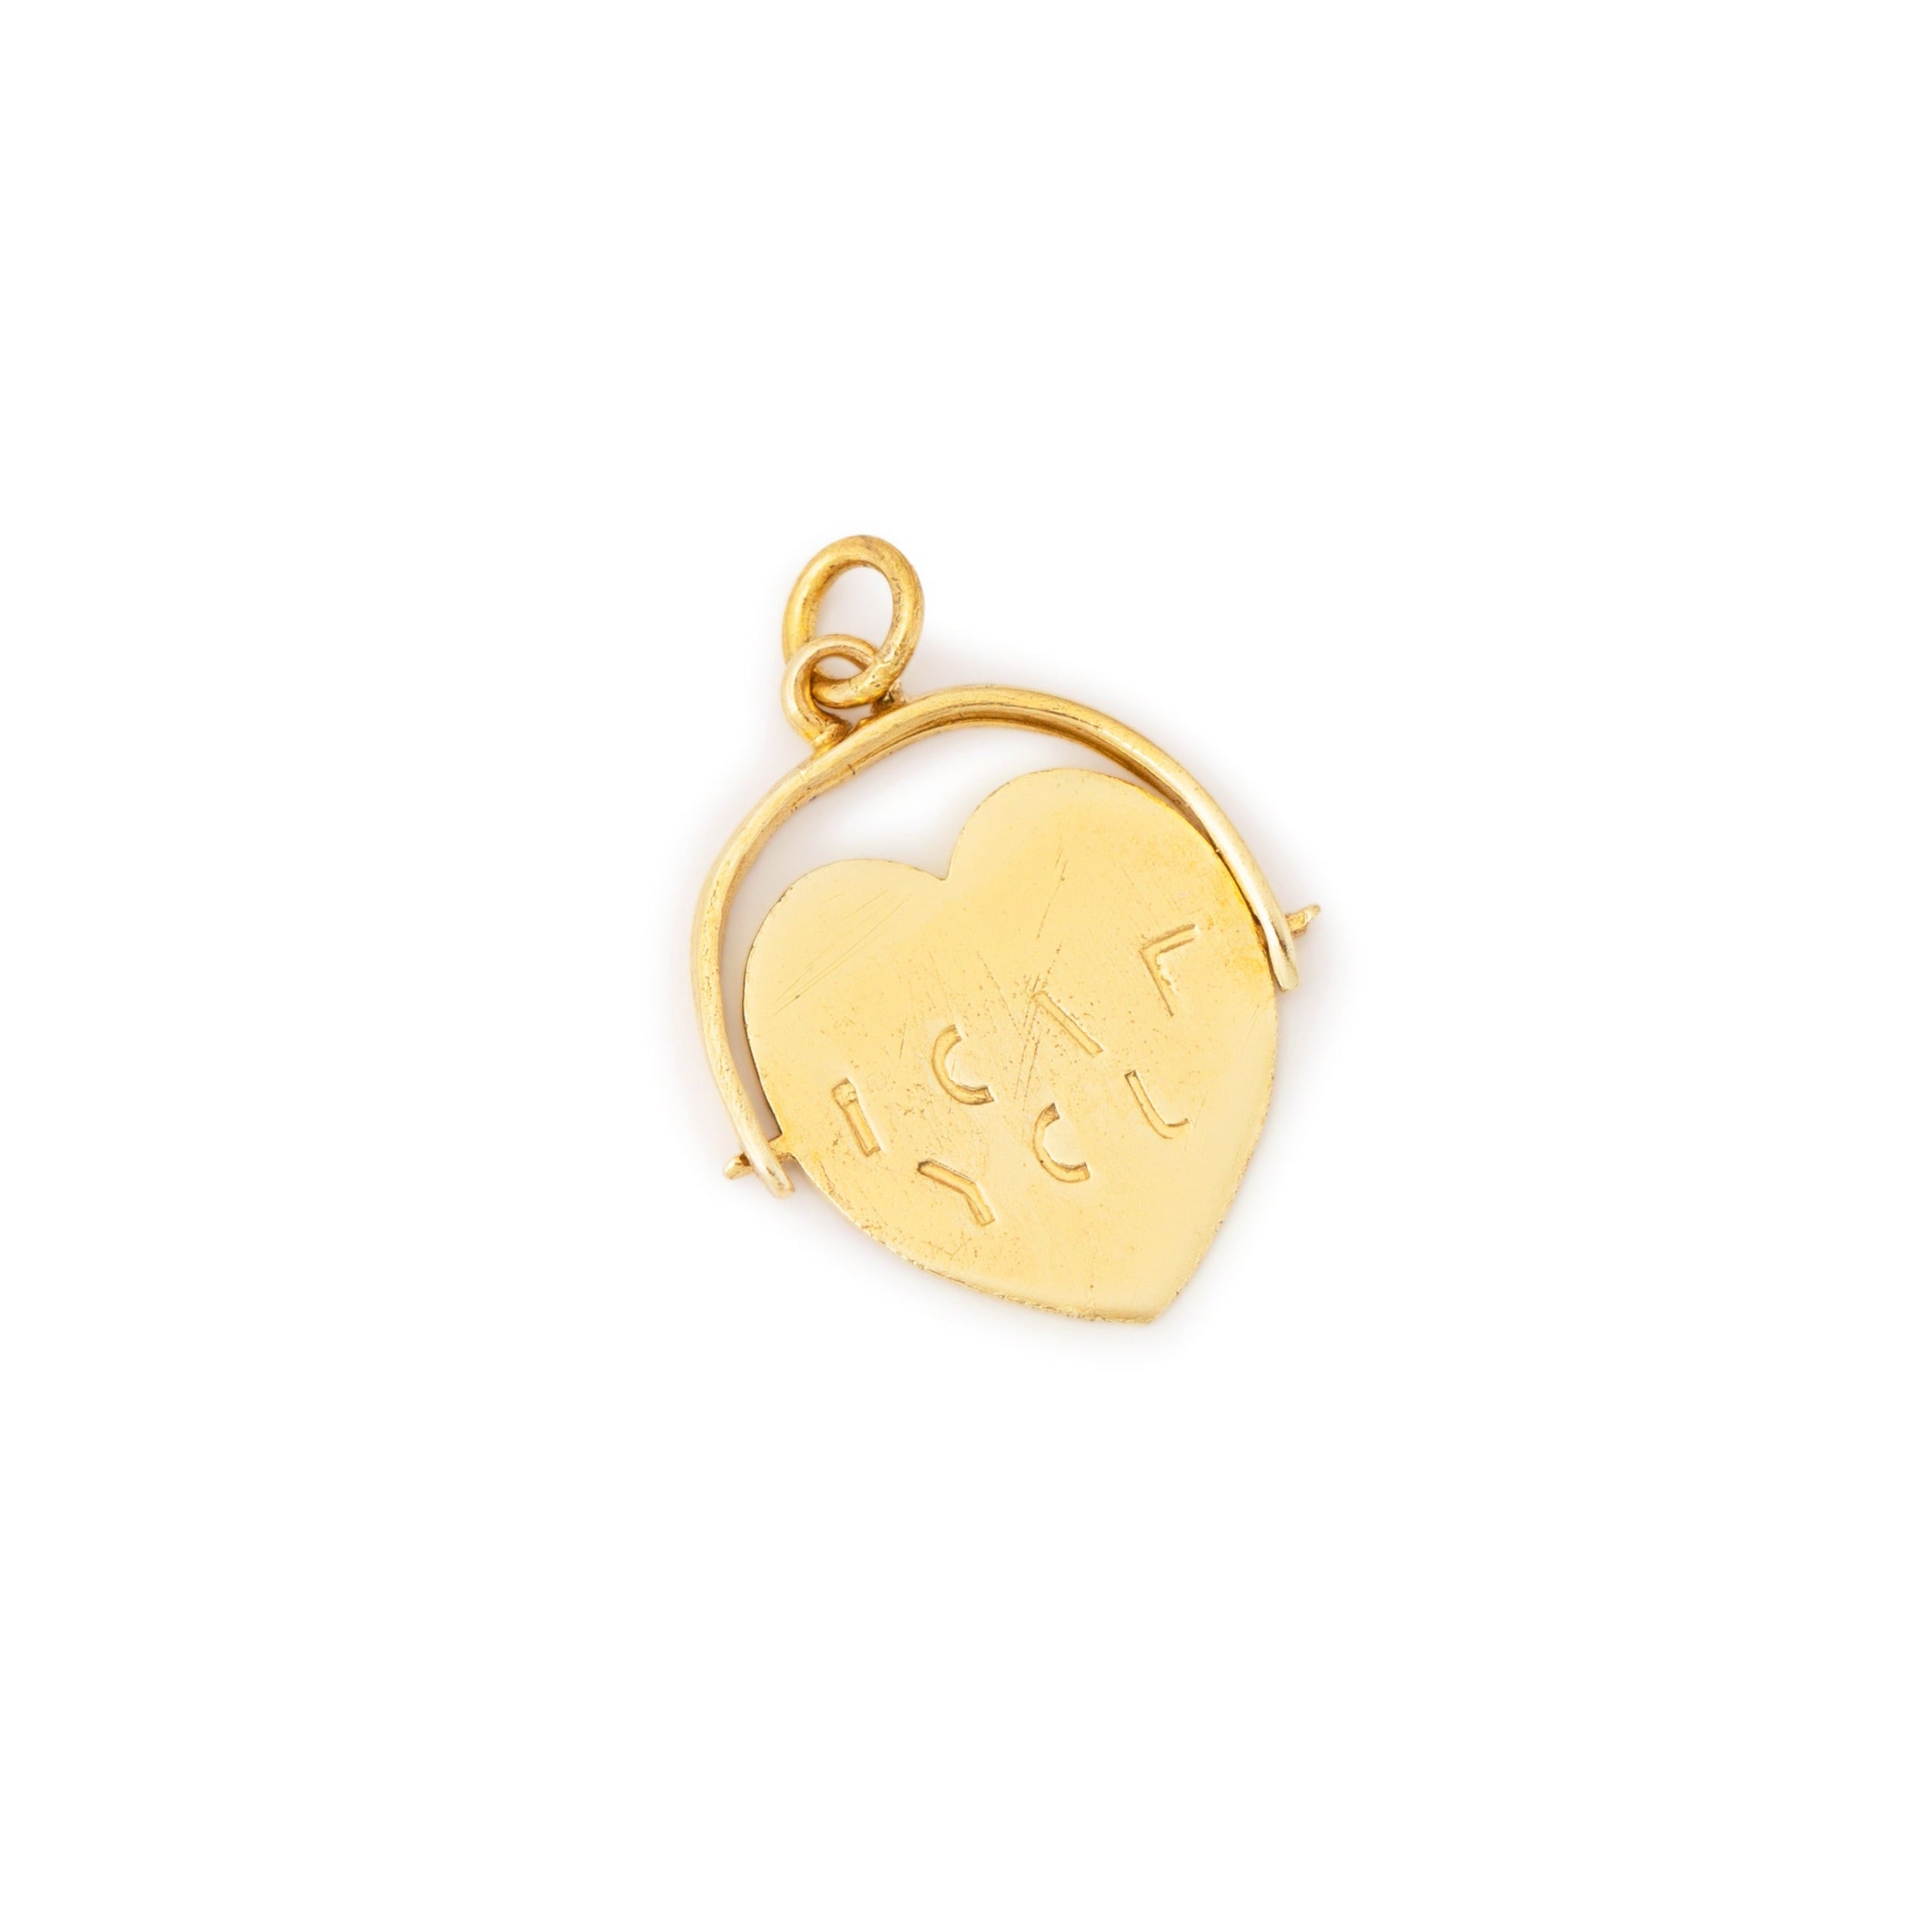 English "I LOVE YOU" Heart Spinner 9k Gold Charm